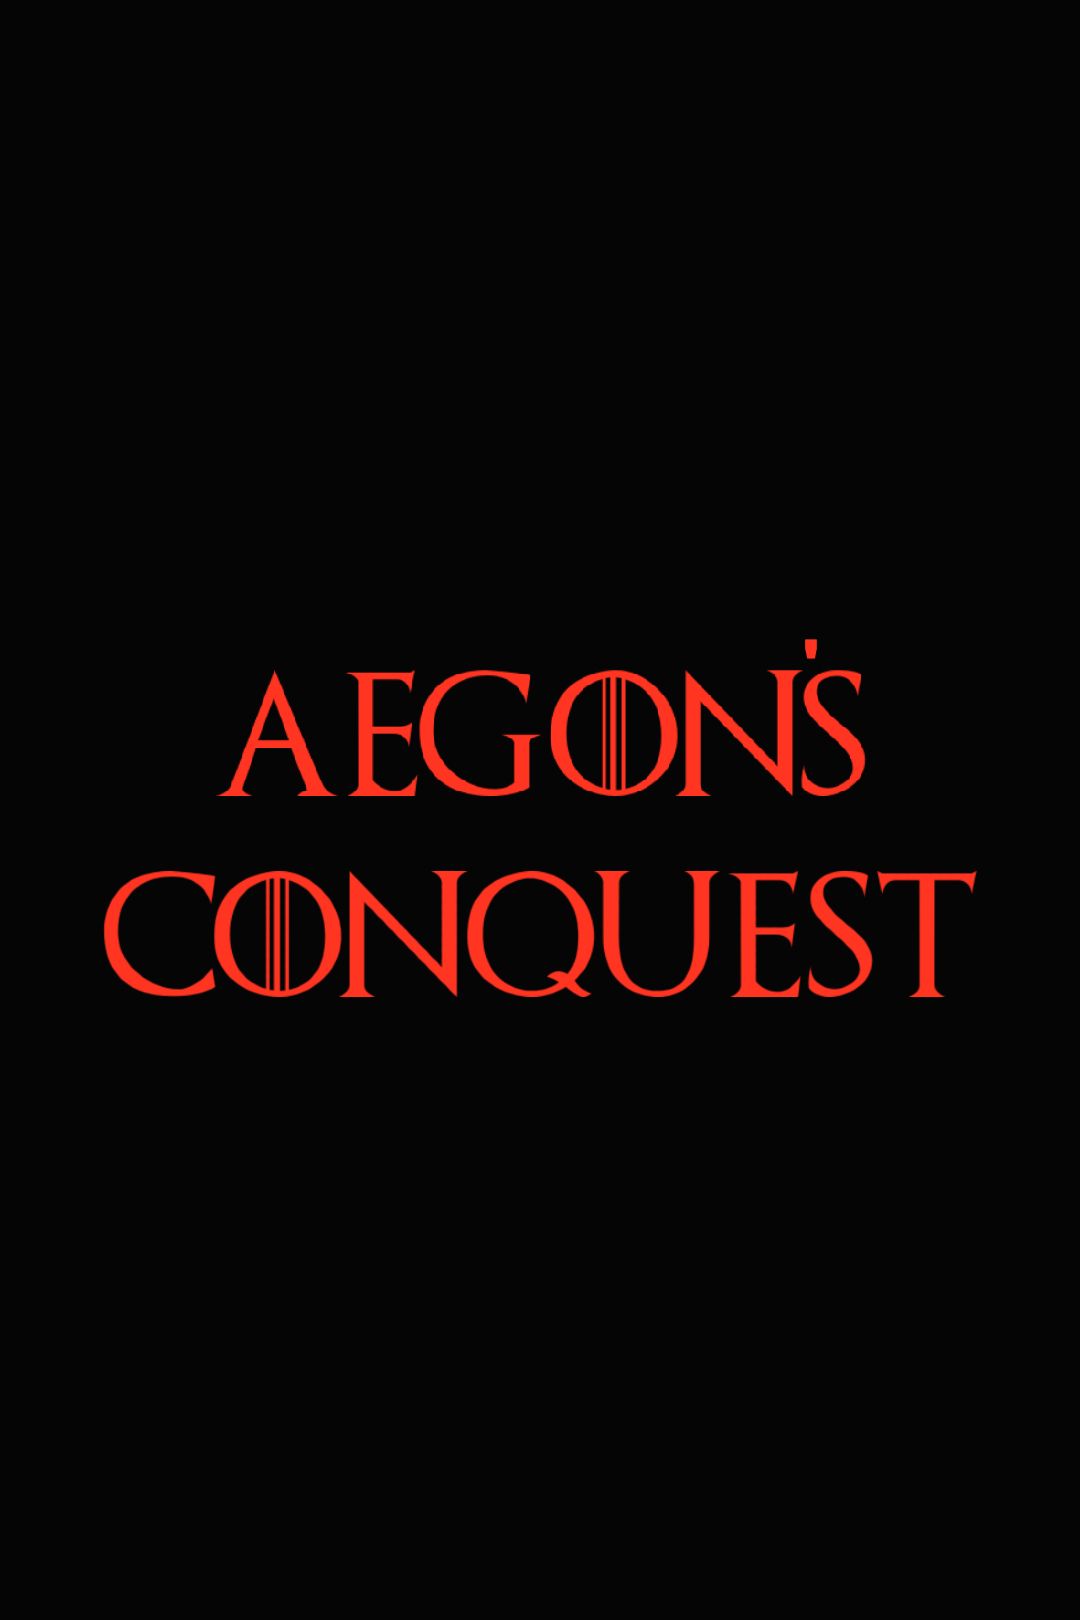 Aegons Conquest TV Series Logo Poster